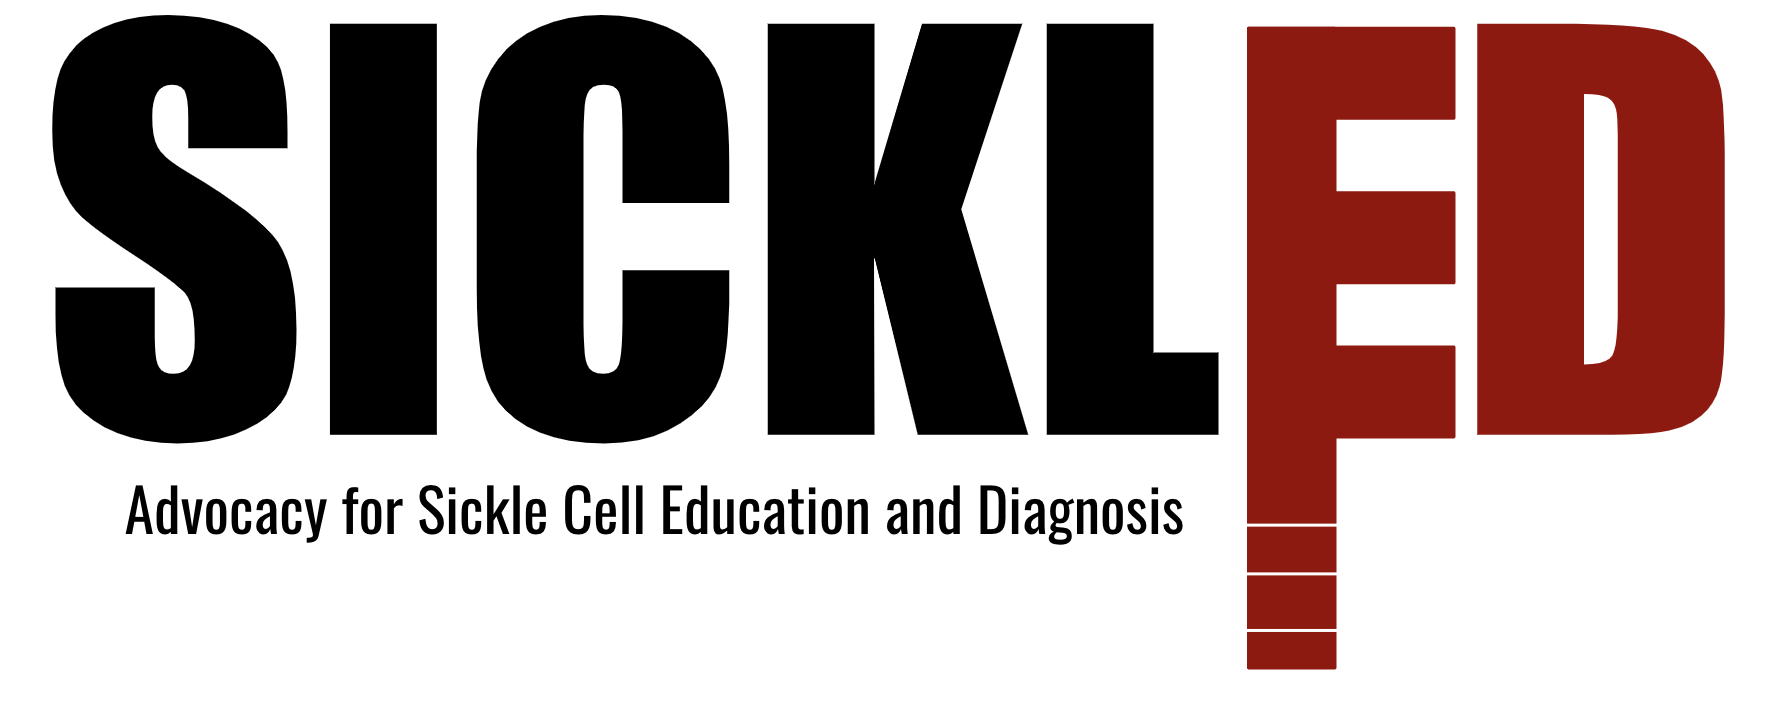 SicklED – Advocacy for Sickle Cell Education and Diagnosis